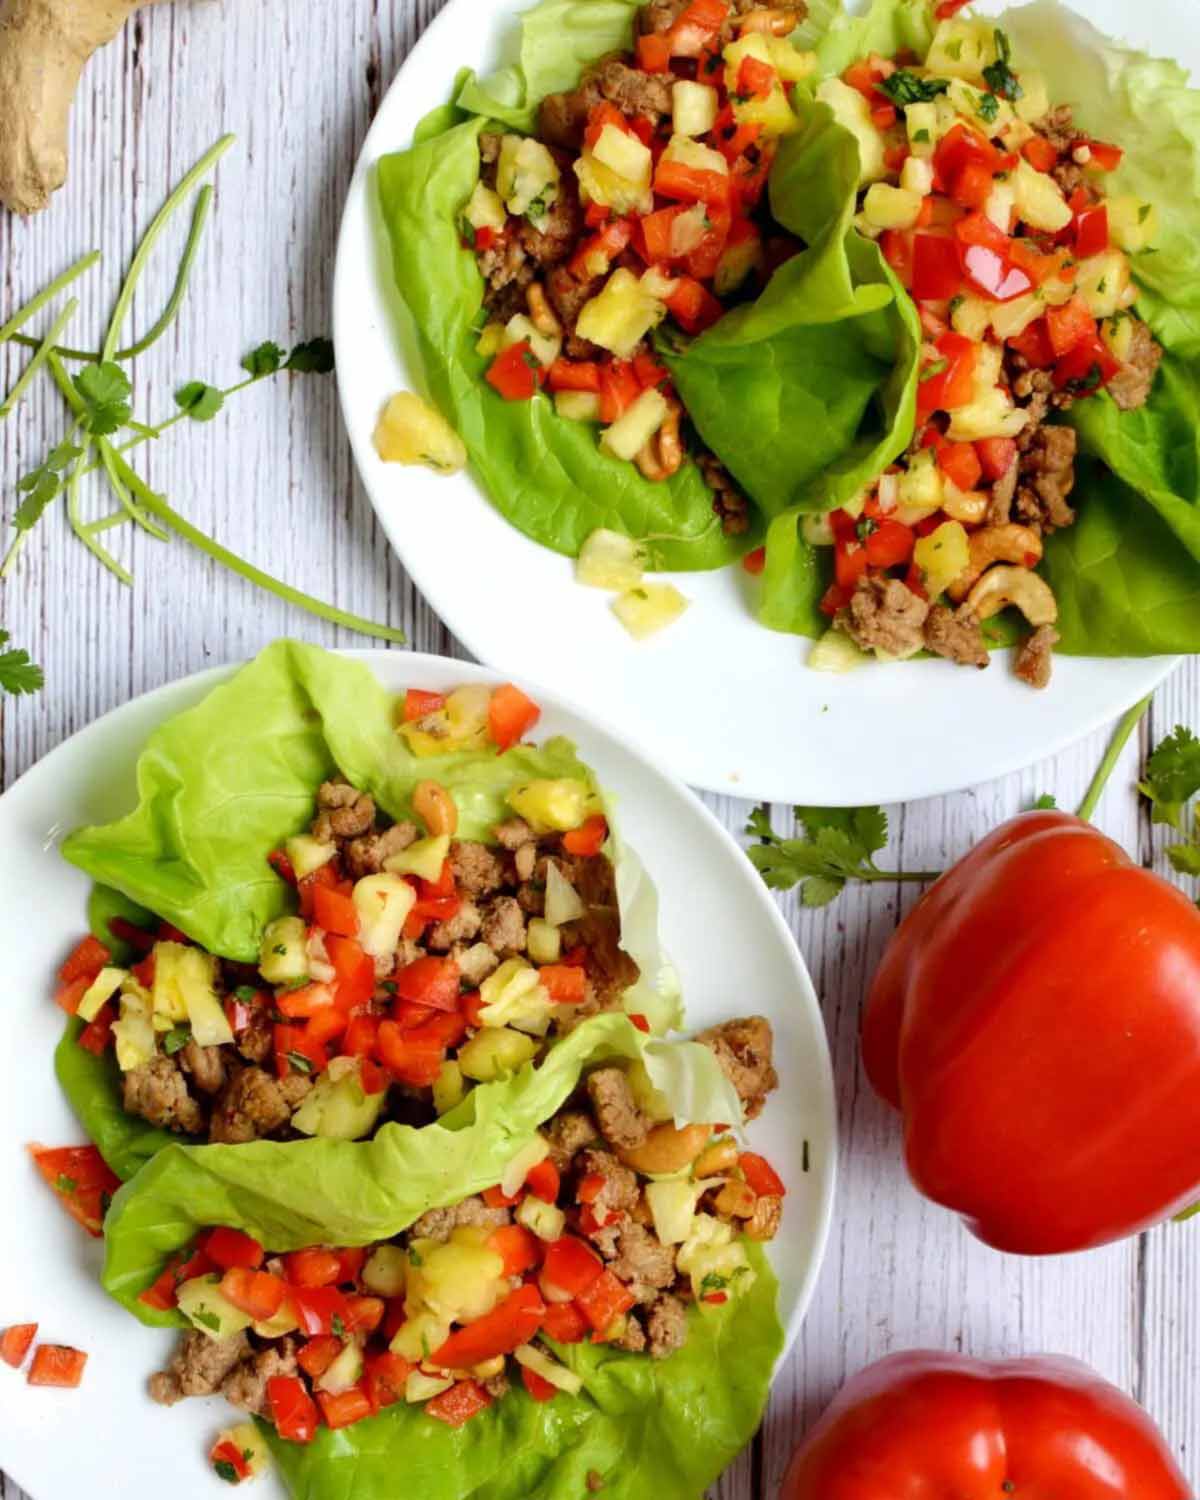 gluten free turkey lettuces wraps on plates with red peppers